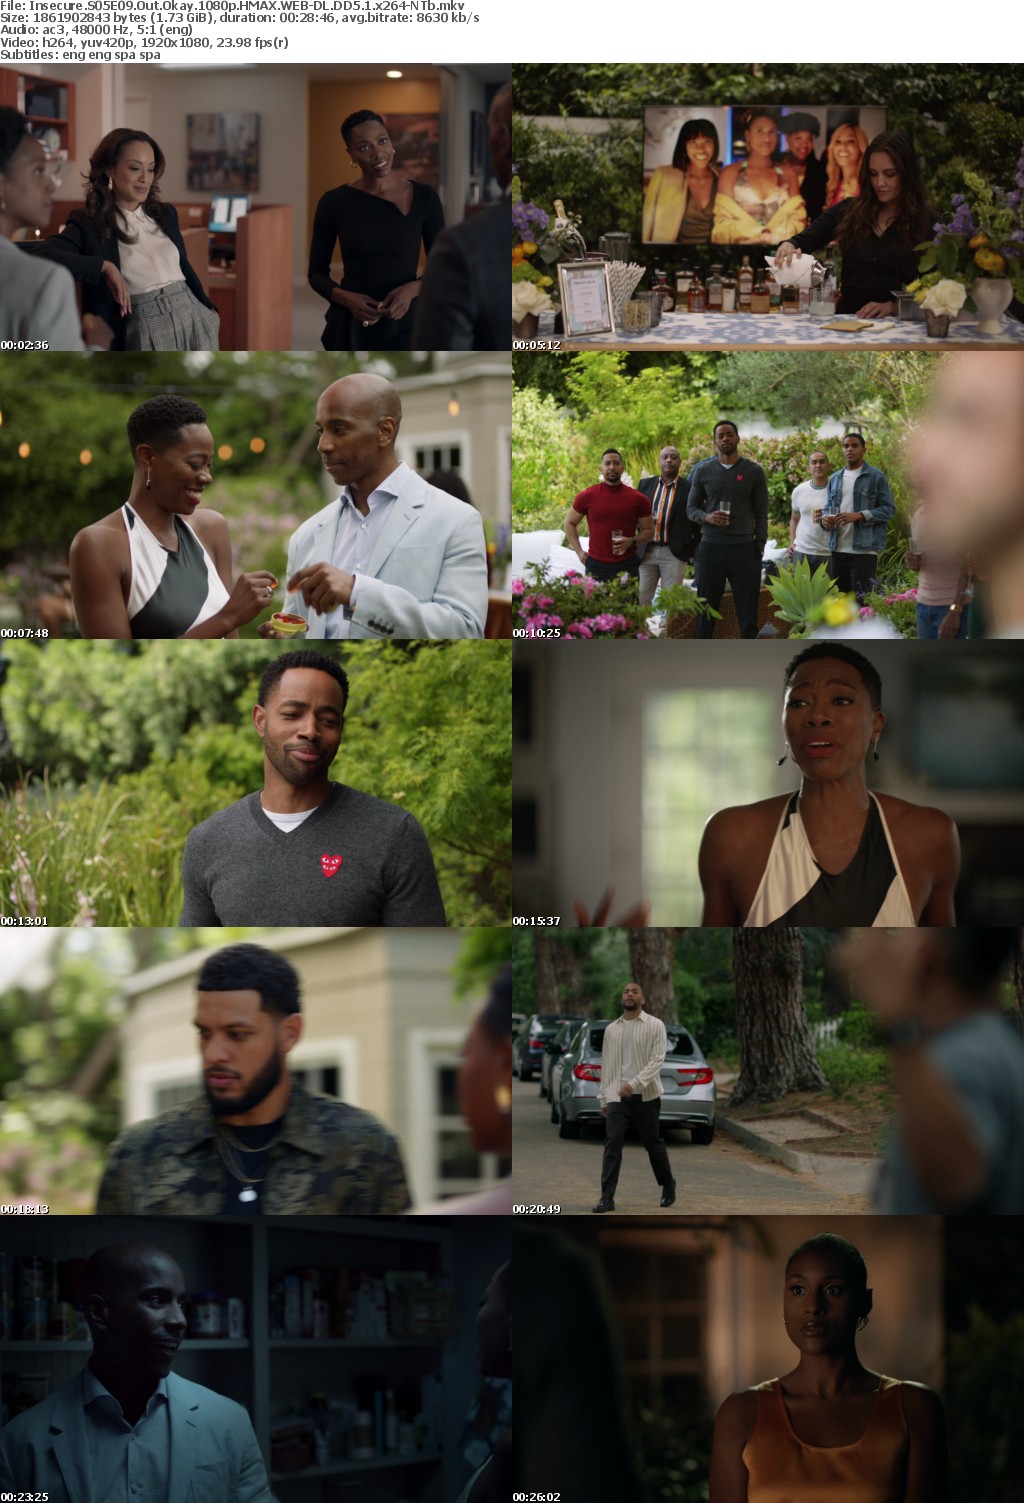 Insecure S05E09 Out Okay 1080p HMAX WEBRip DD5 1 x264-NTb